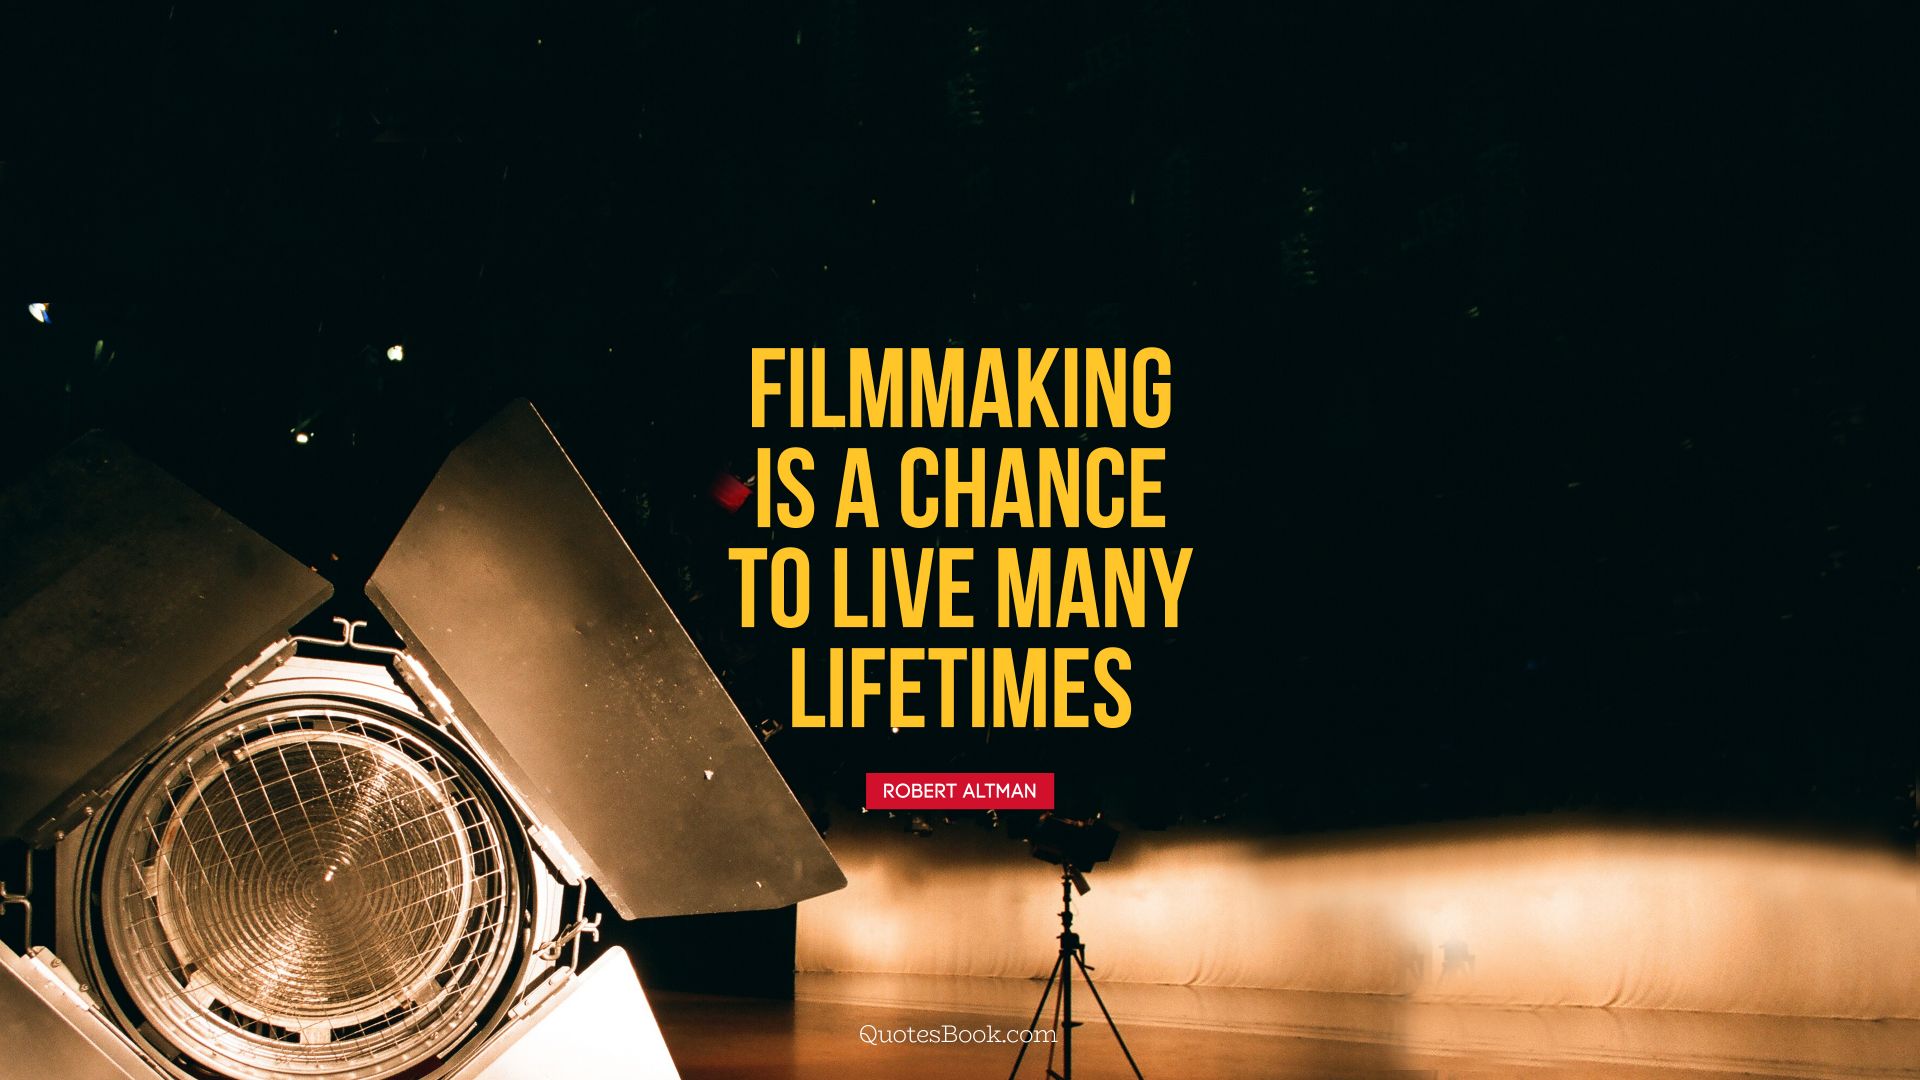 Filmmaking is a chance to live many lifetimes. - Quote by Robert Altman